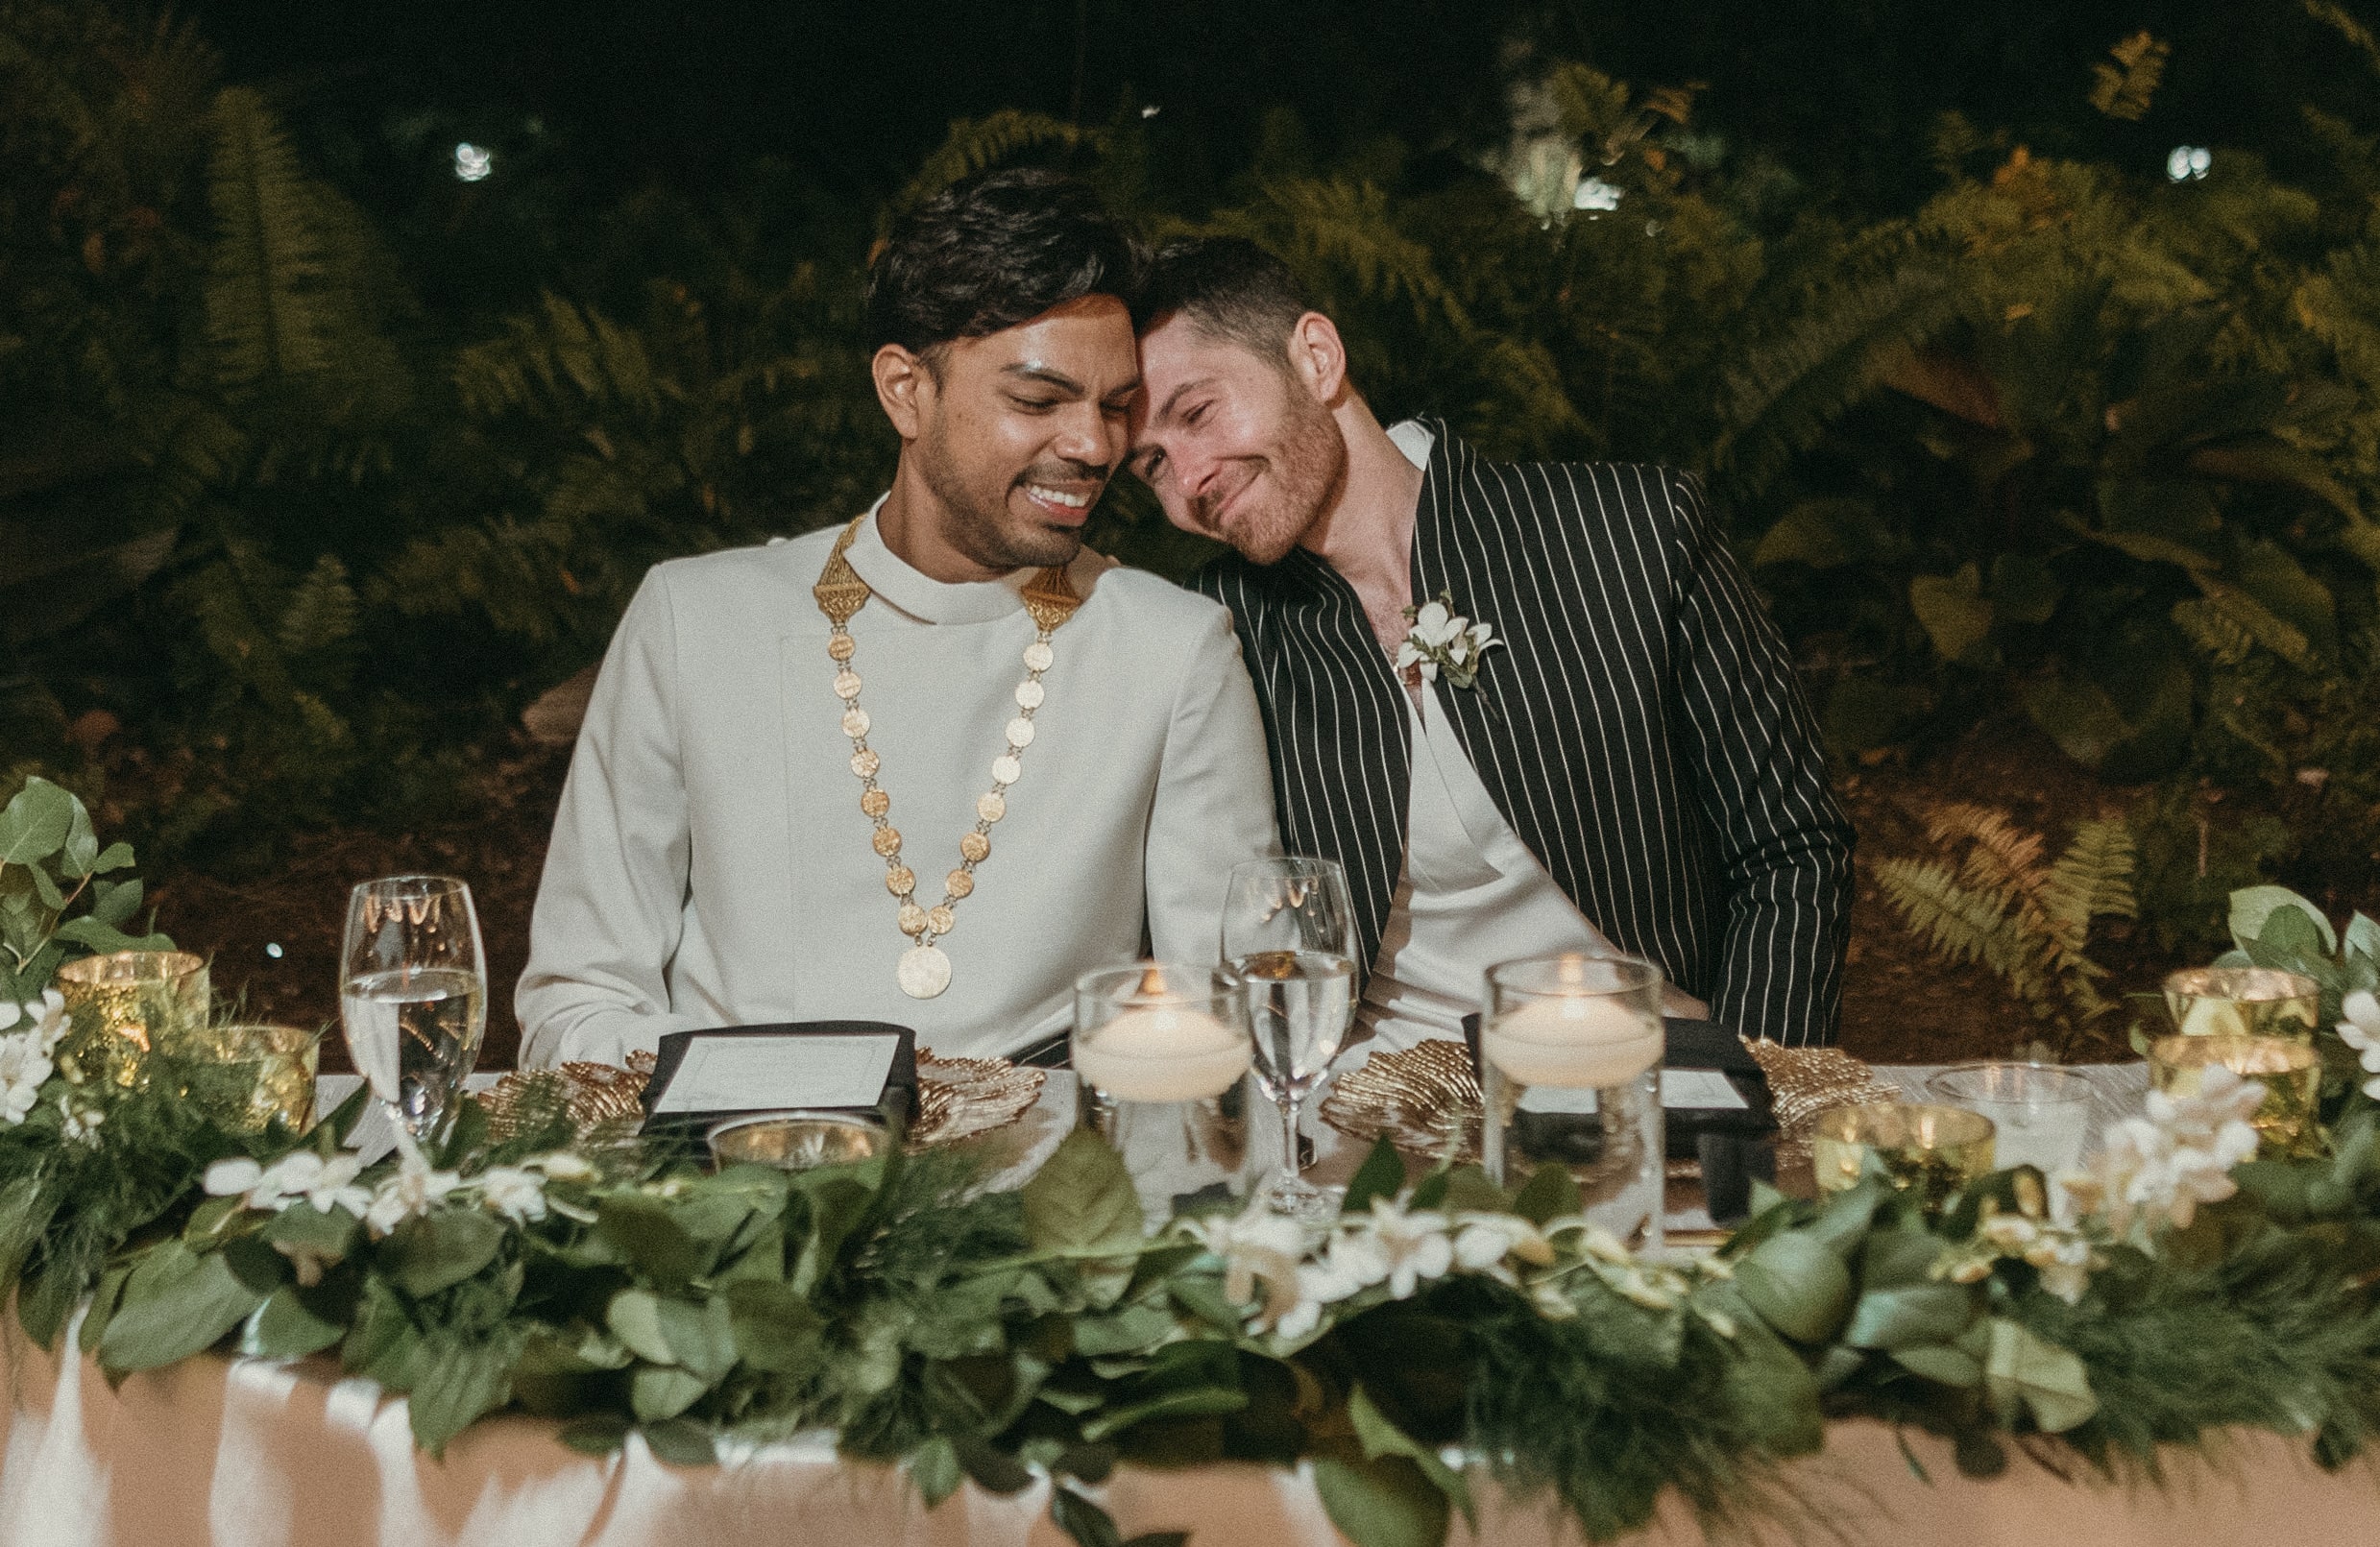 Grooms seated at their sweetheart's table laughing and embracing during a wedding speech